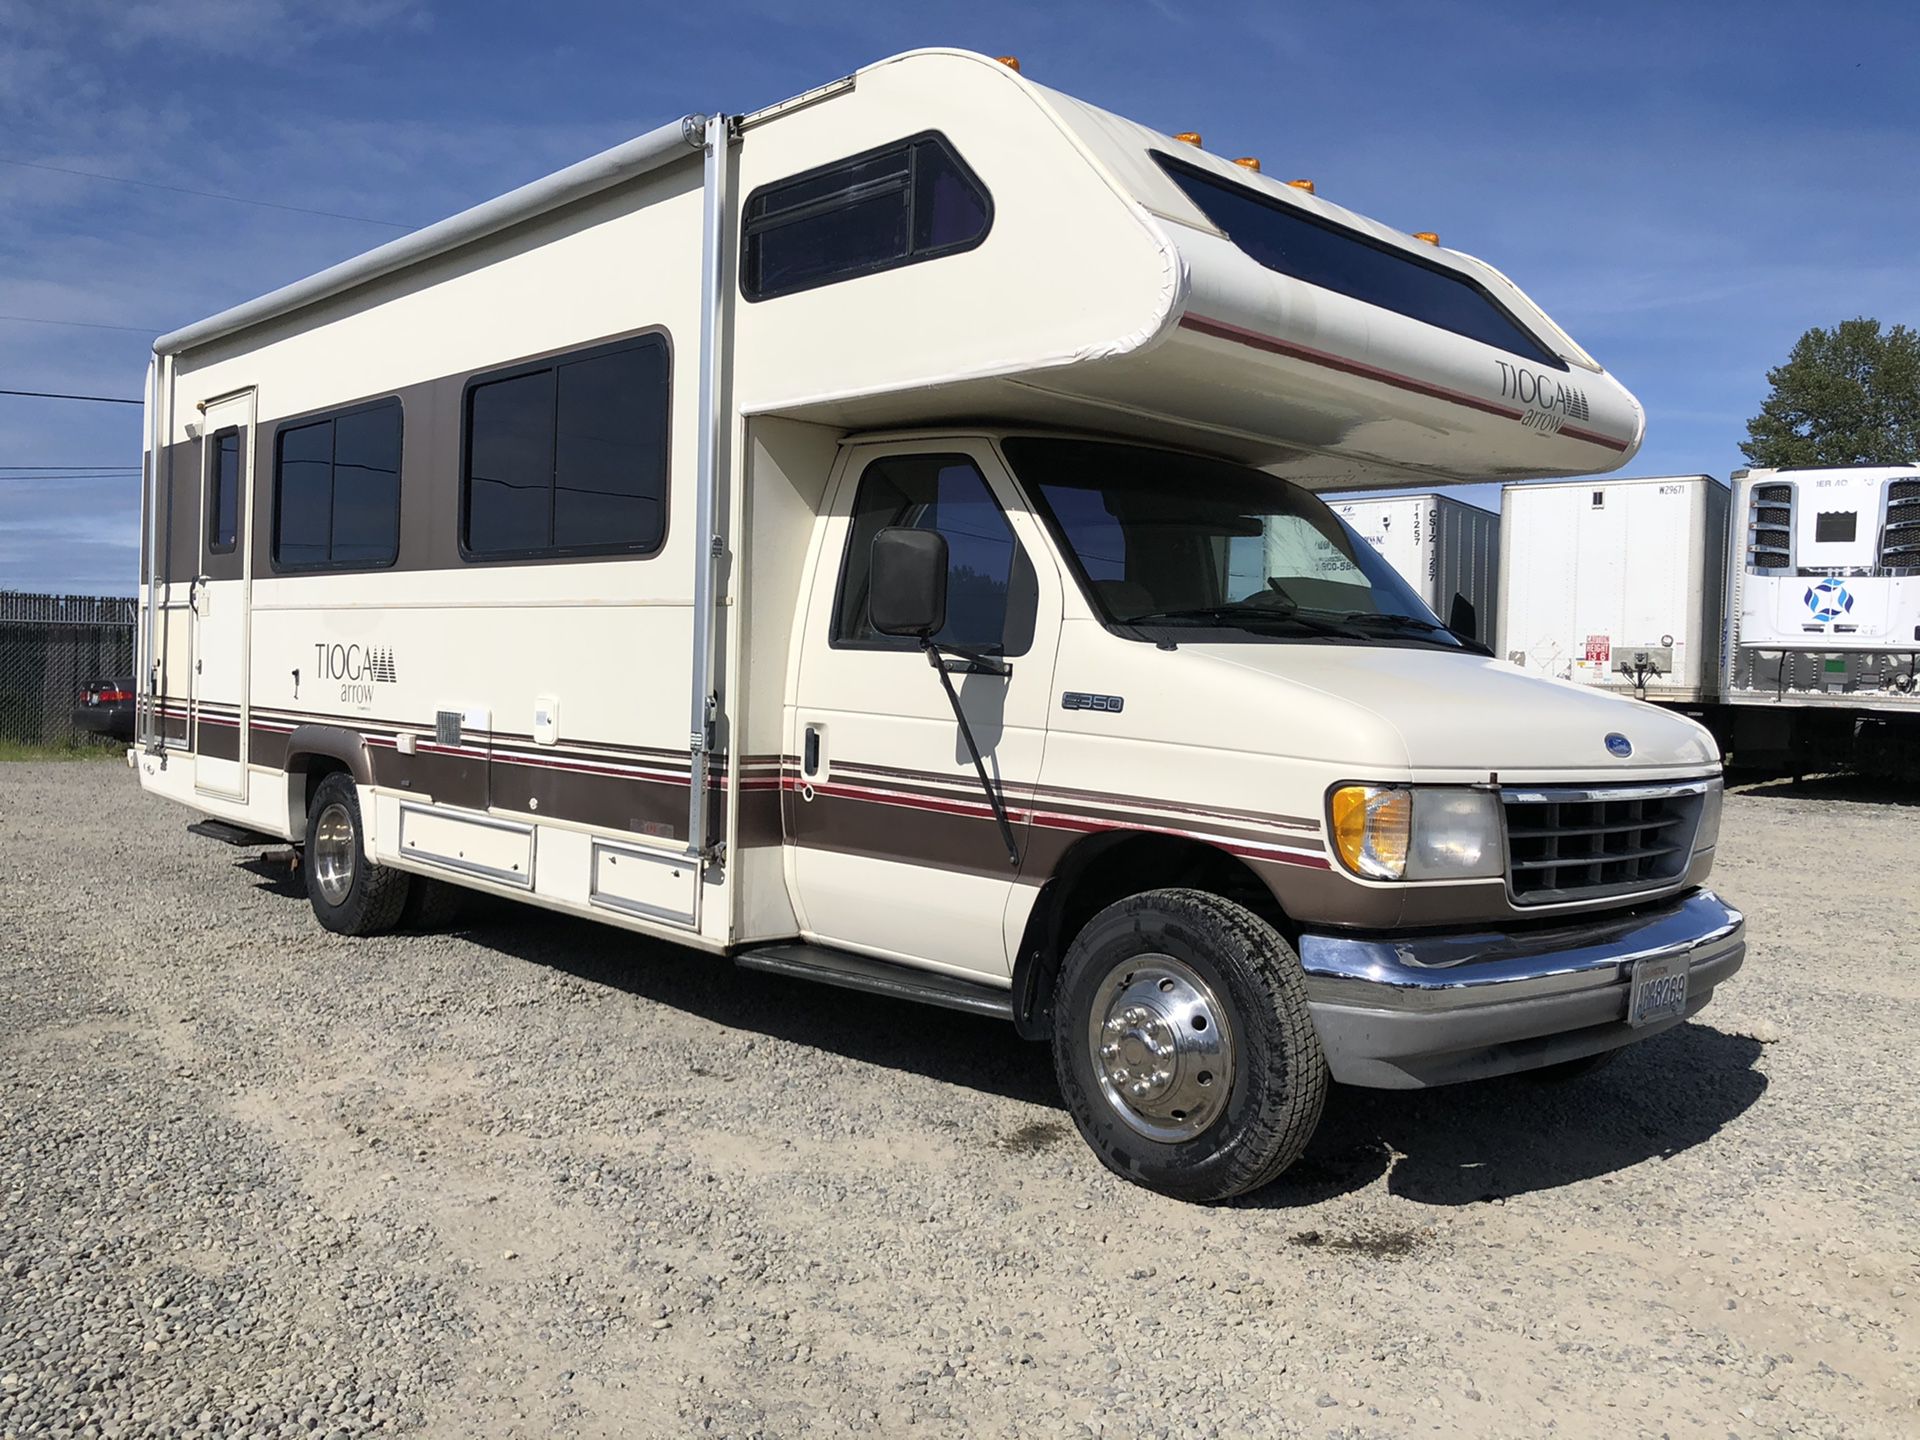 1993 Ford Tioga 27 foot class C sleeps 6 only 40K miles Must See